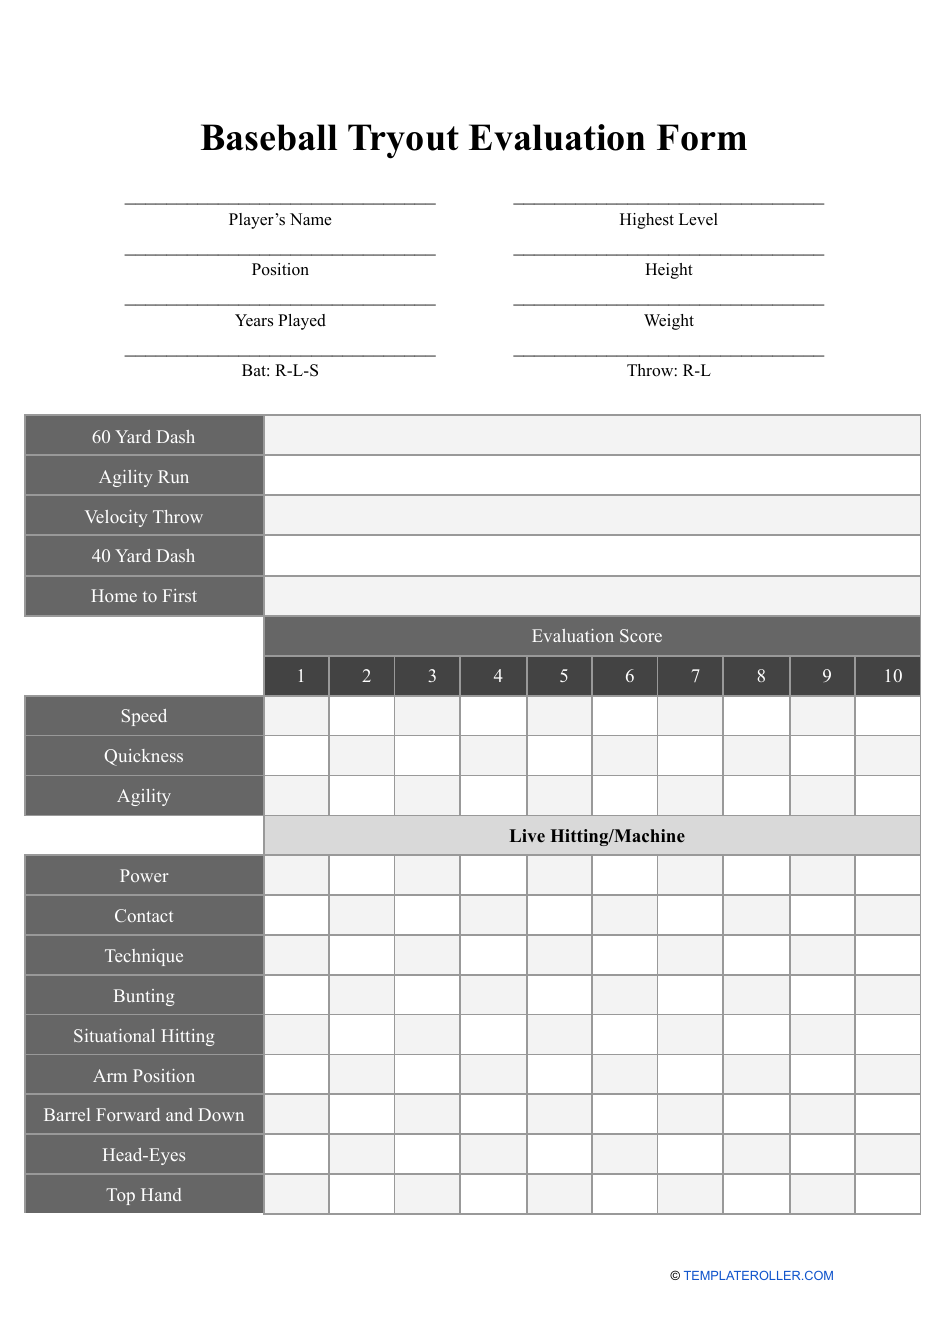 Baseball Tryout Evaluation Form, Page 1